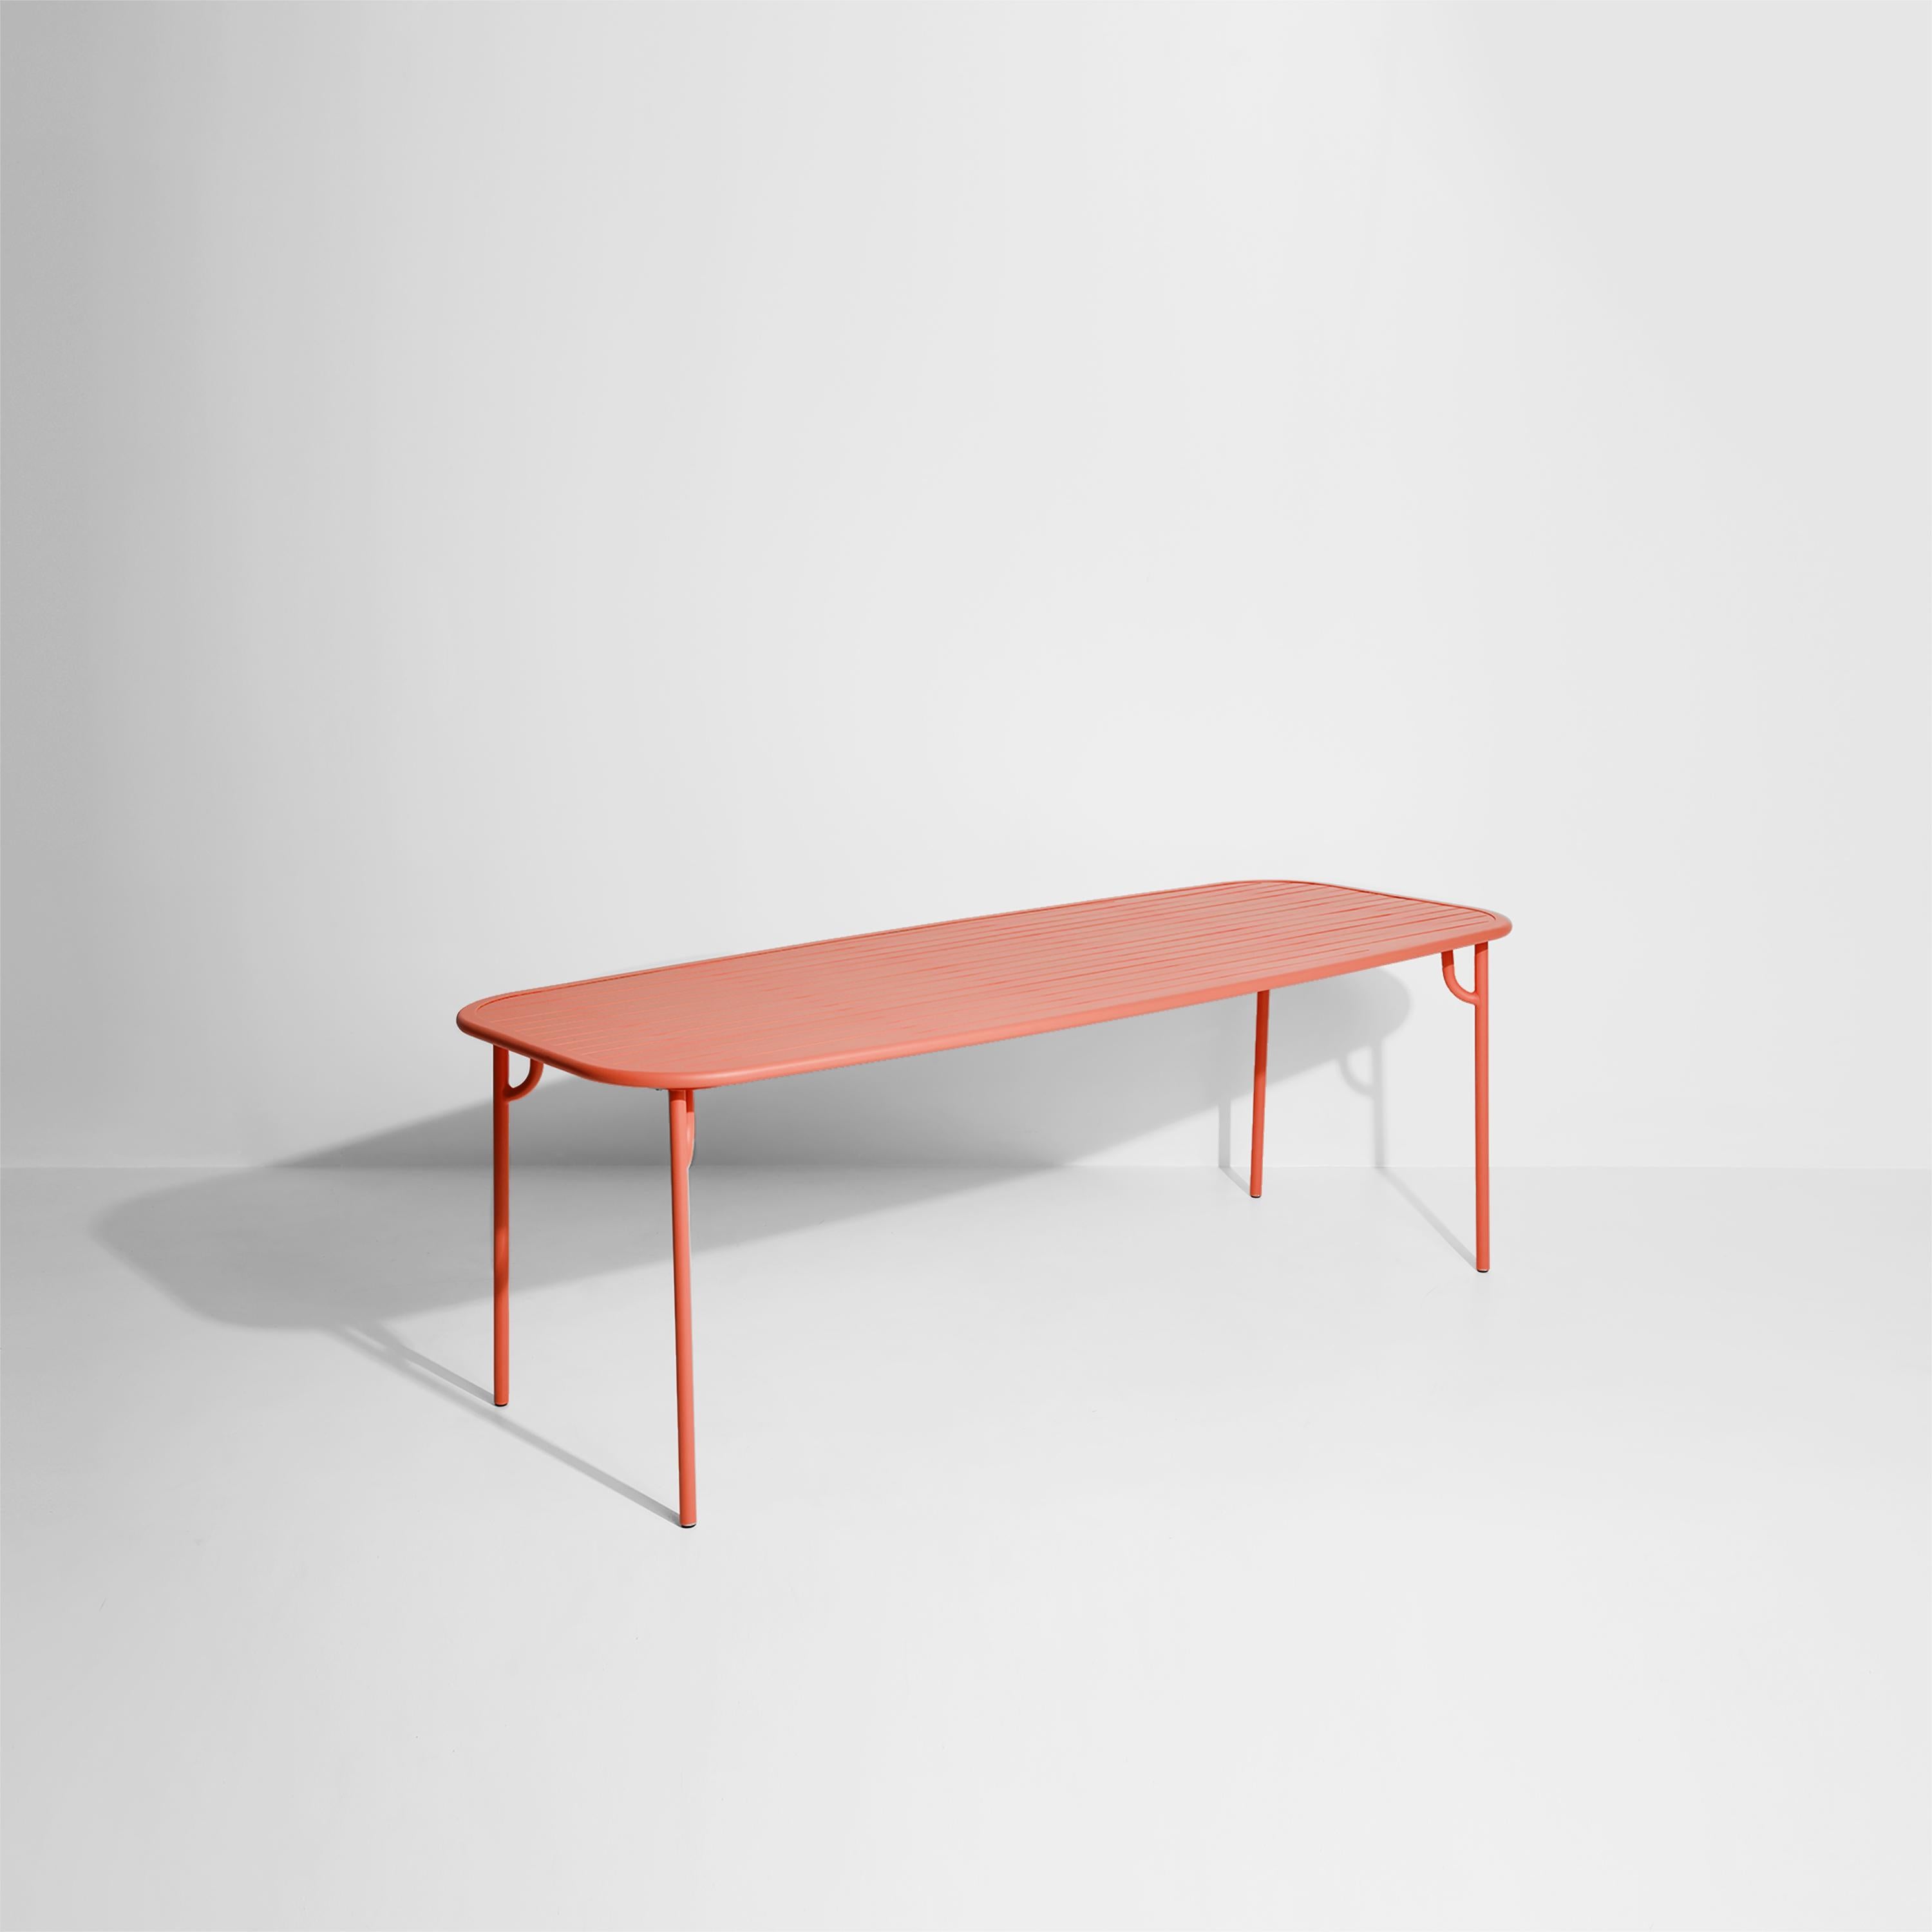 Petite Friture Week-End Large Rectangular Dining Table in Coral Aluminium with Slats by Studio BrichetZiegler, 2017

The week-end collection is a full range of outdoor furniture, in aluminium grained epoxy paint, matt finish, that includes 18